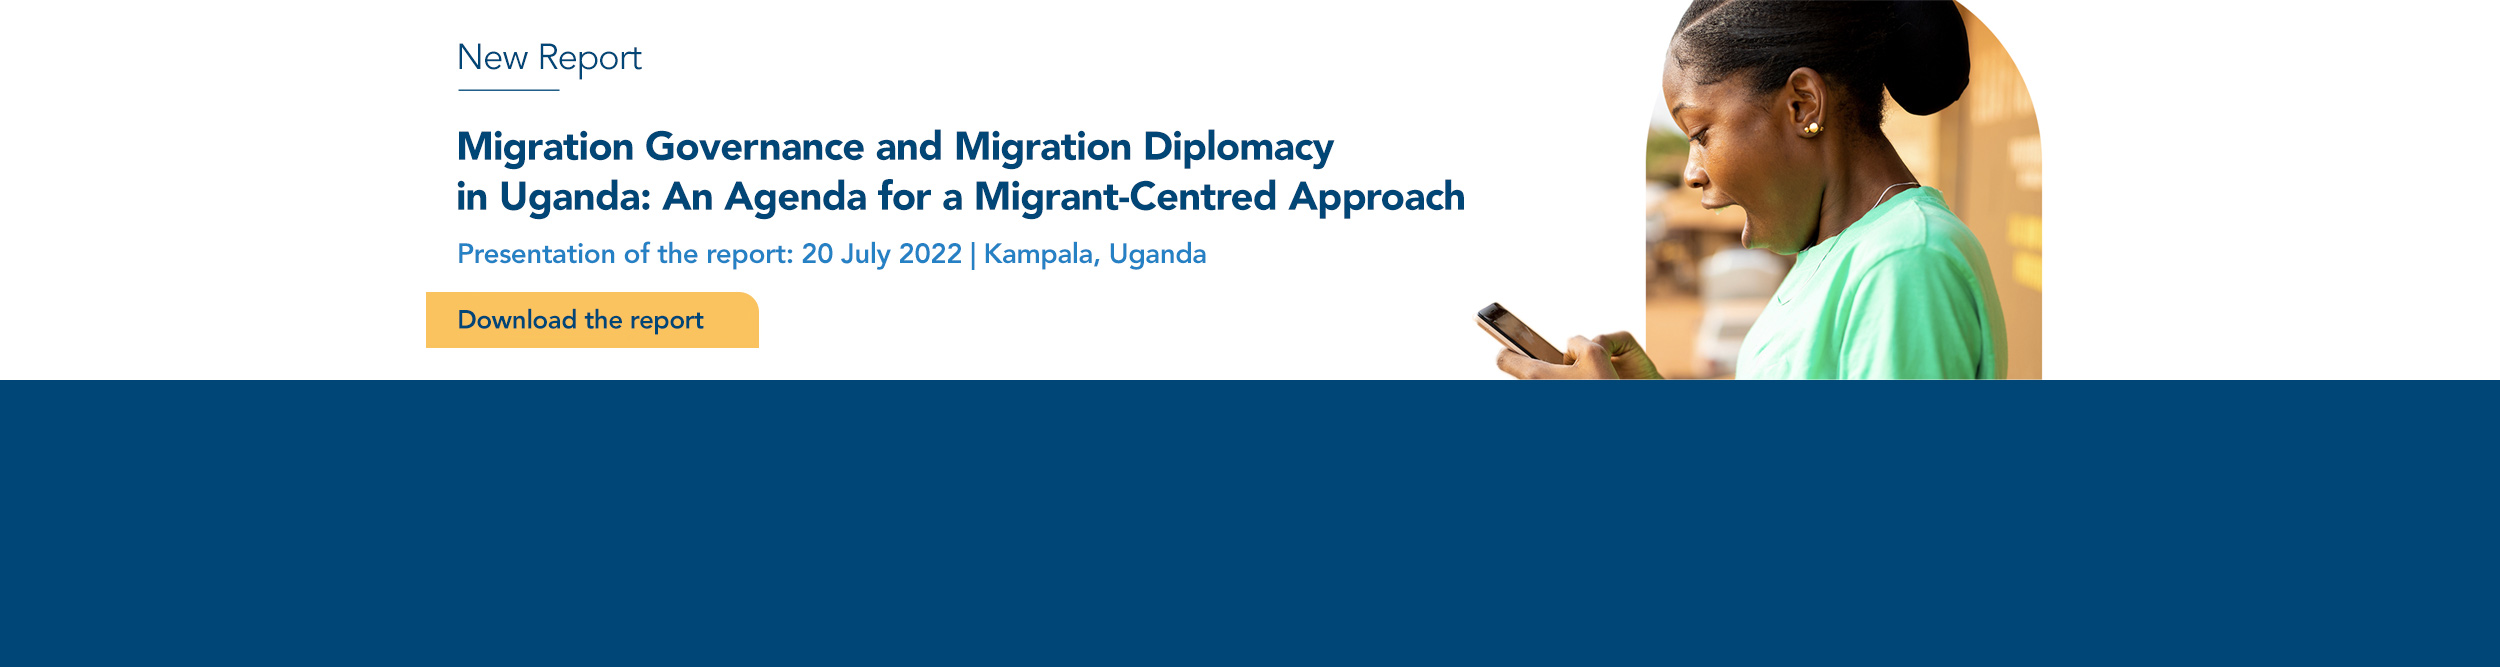 Permalink to:A new report available for download on “Migration Governance and Migration Diplomacy in Uganda”